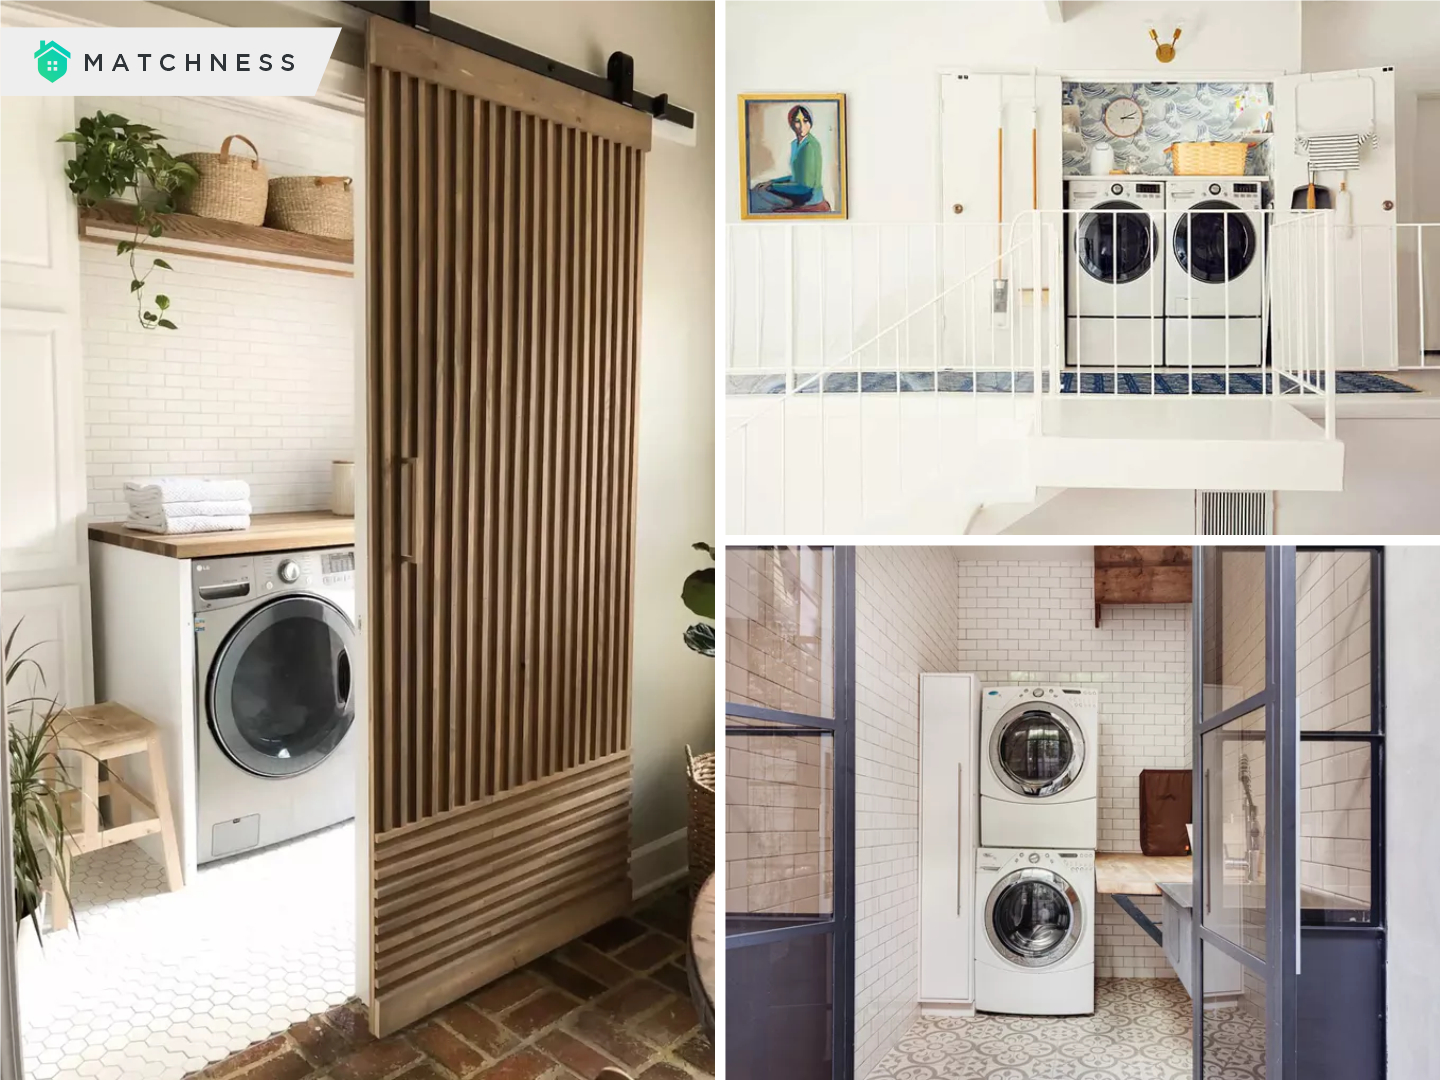 Well-Designed Laundry Room Door Ideas For Funnier Space - Matchness.com